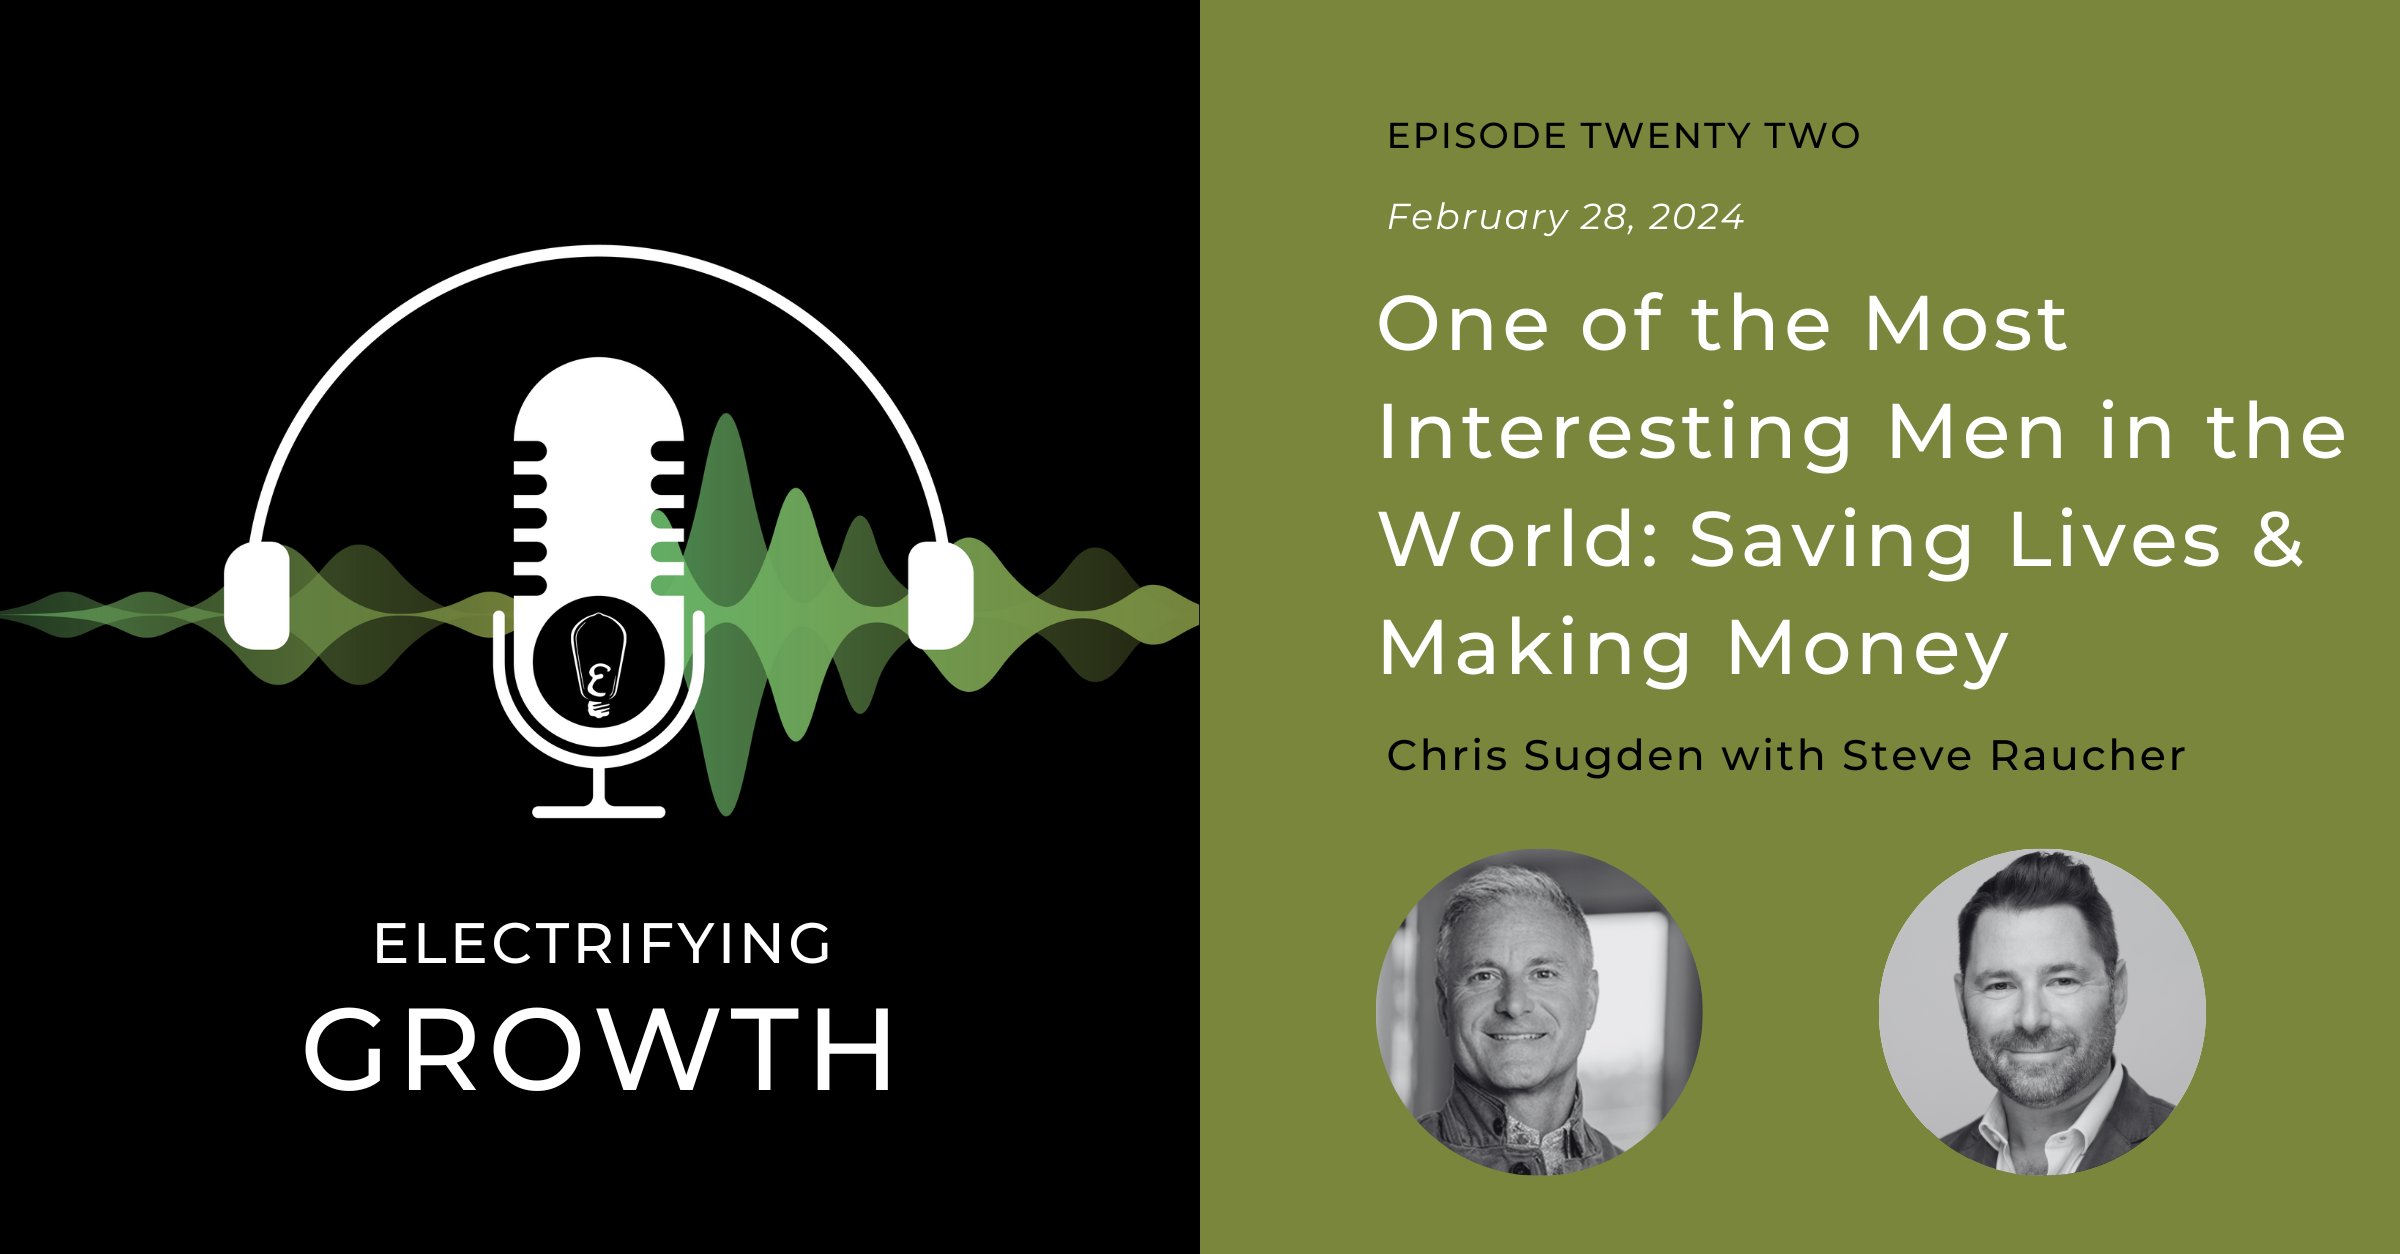 Electrifying Growth Episode 22: One of the Most Interesting Men in the World: Saving Lives and Making Money with Steve Raucher